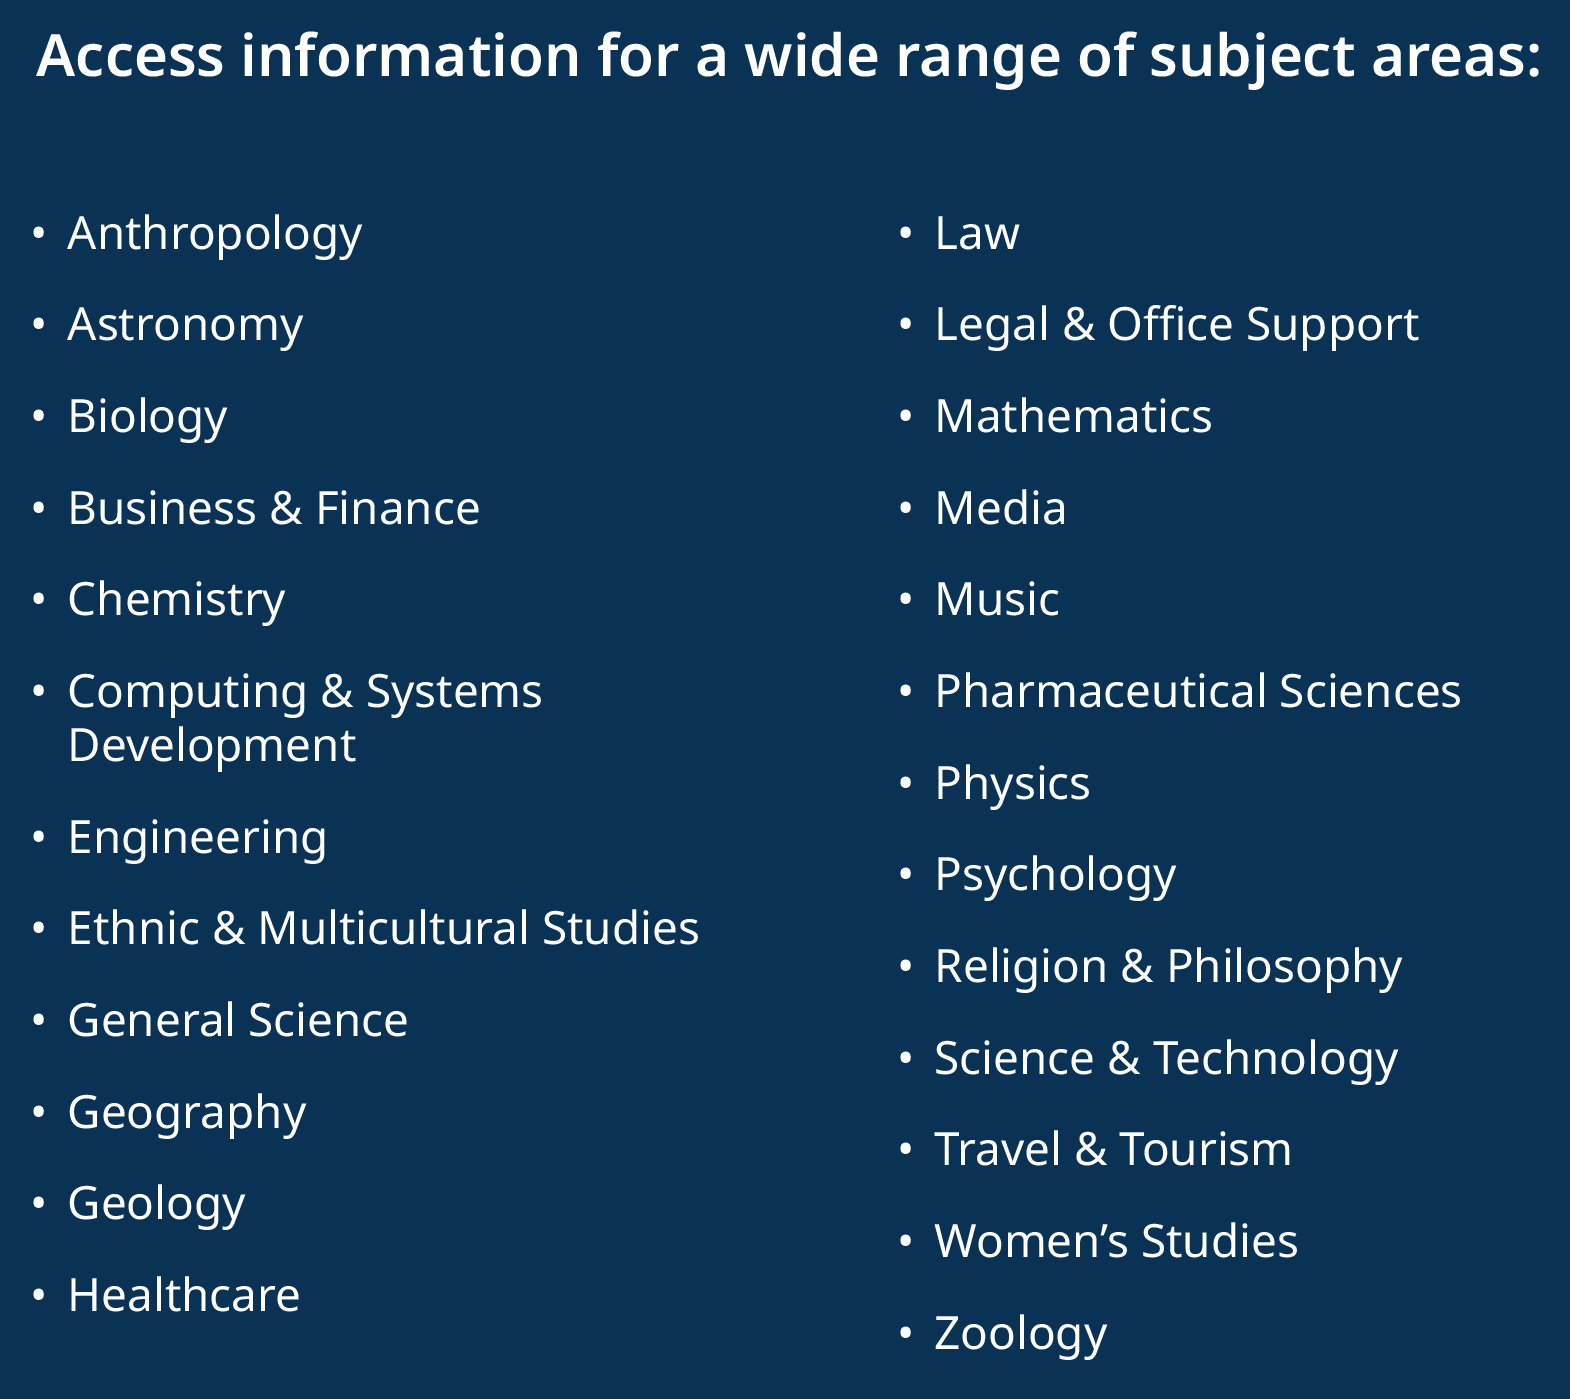 Access current information on dozens of study areas